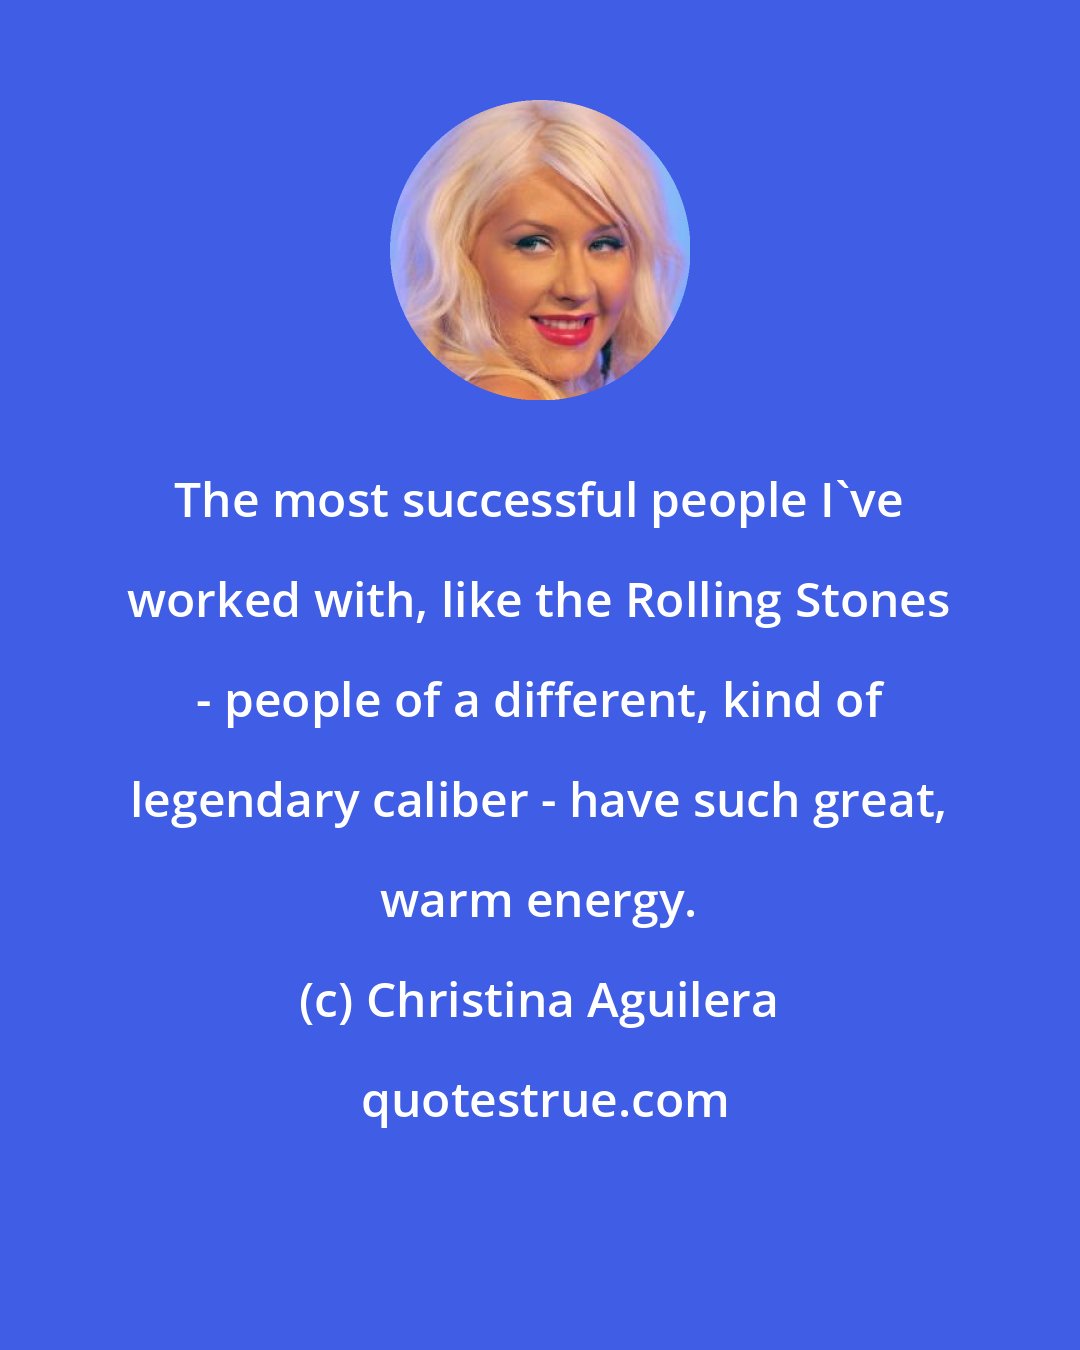 Christina Aguilera: The most successful people I've worked with, like the Rolling Stones - people of a different, kind of legendary caliber - have such great, warm energy.